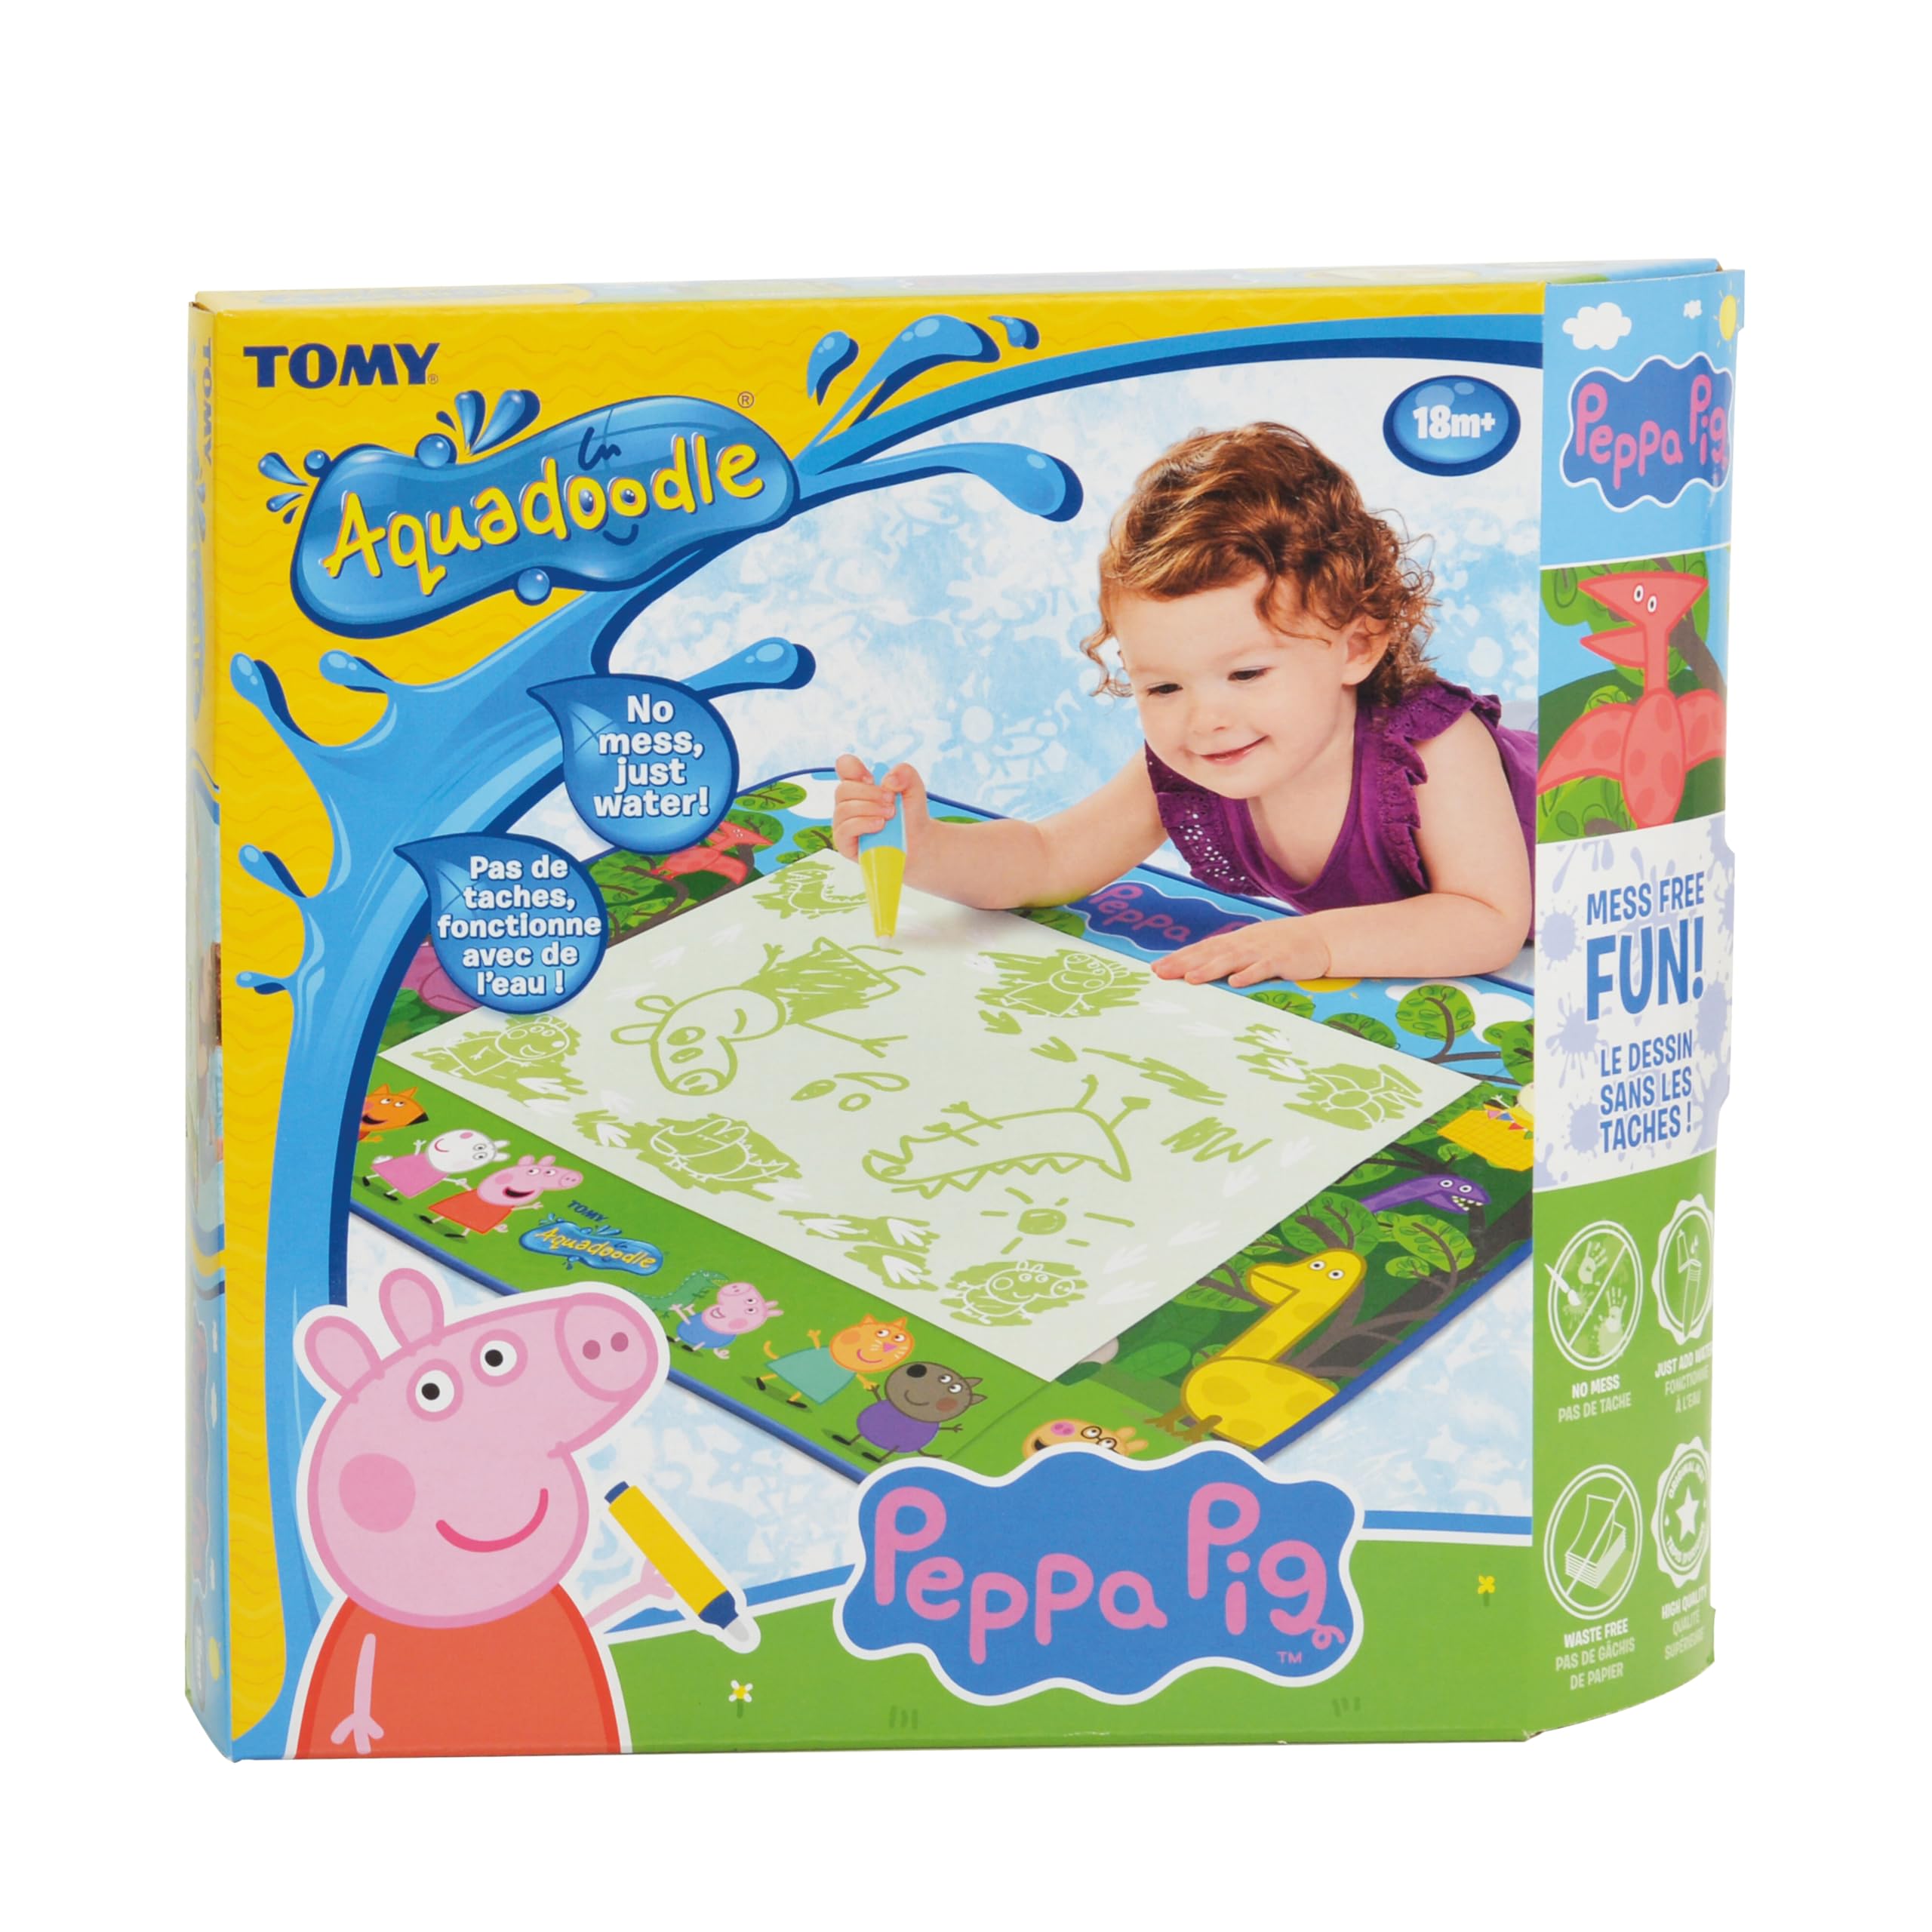 Aquadoodle Peppa Pig and Dinosaurs Water Doodle Mat - Aqua Doodle Pen and Water Play Mat for No Mess Colouring and Drawing - Educational Arts and Crafts Peppa Pig Toys - Toddler Toys 18 Months Plus